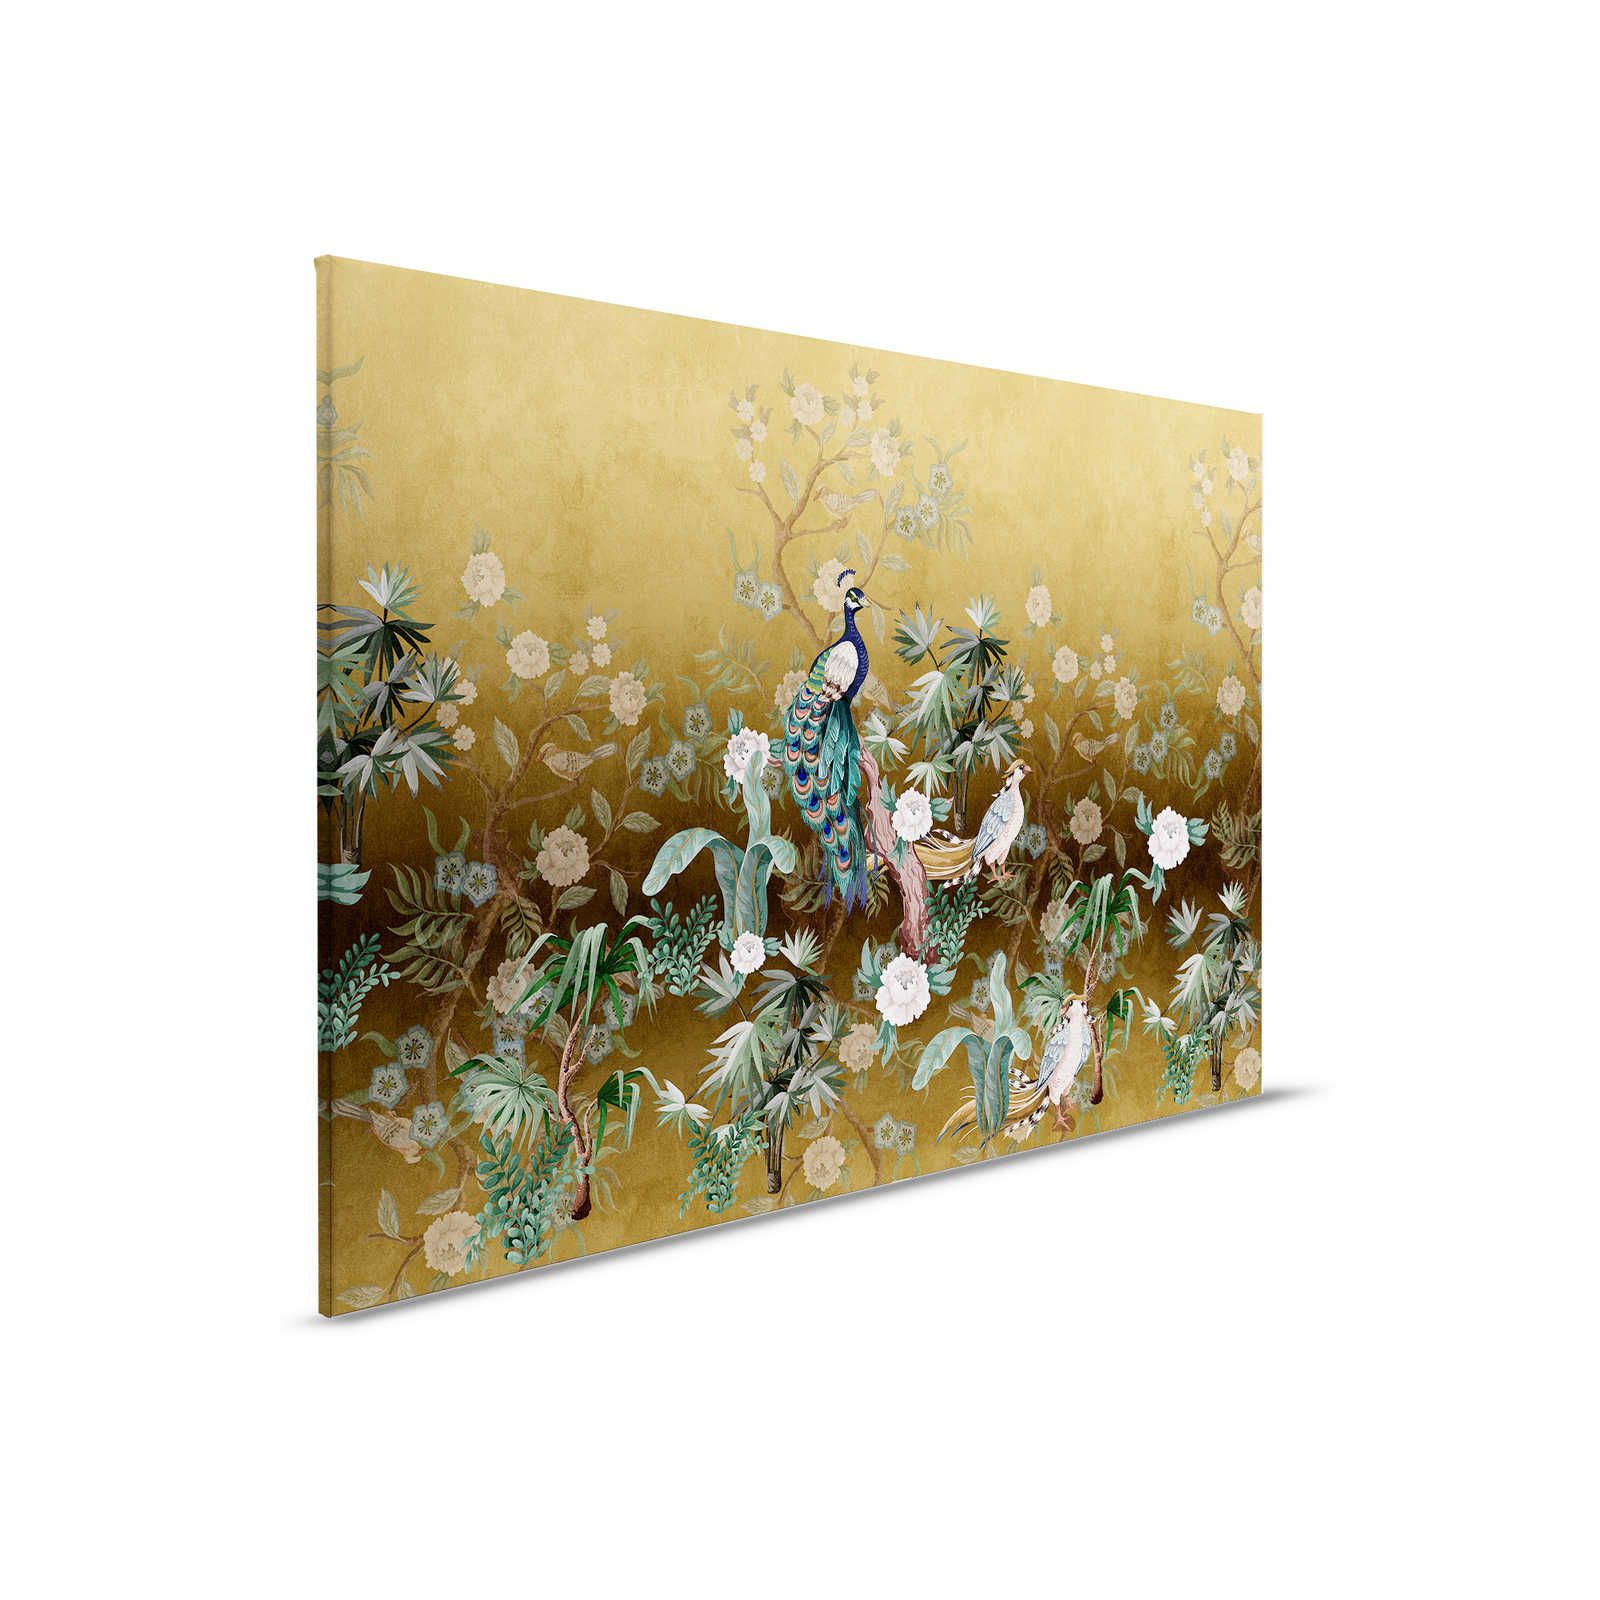 Peacock Island 3 - Canvas painting Peacocks Garden Gold with Plants & Blossoms - 0,90 m x 0,60 m
